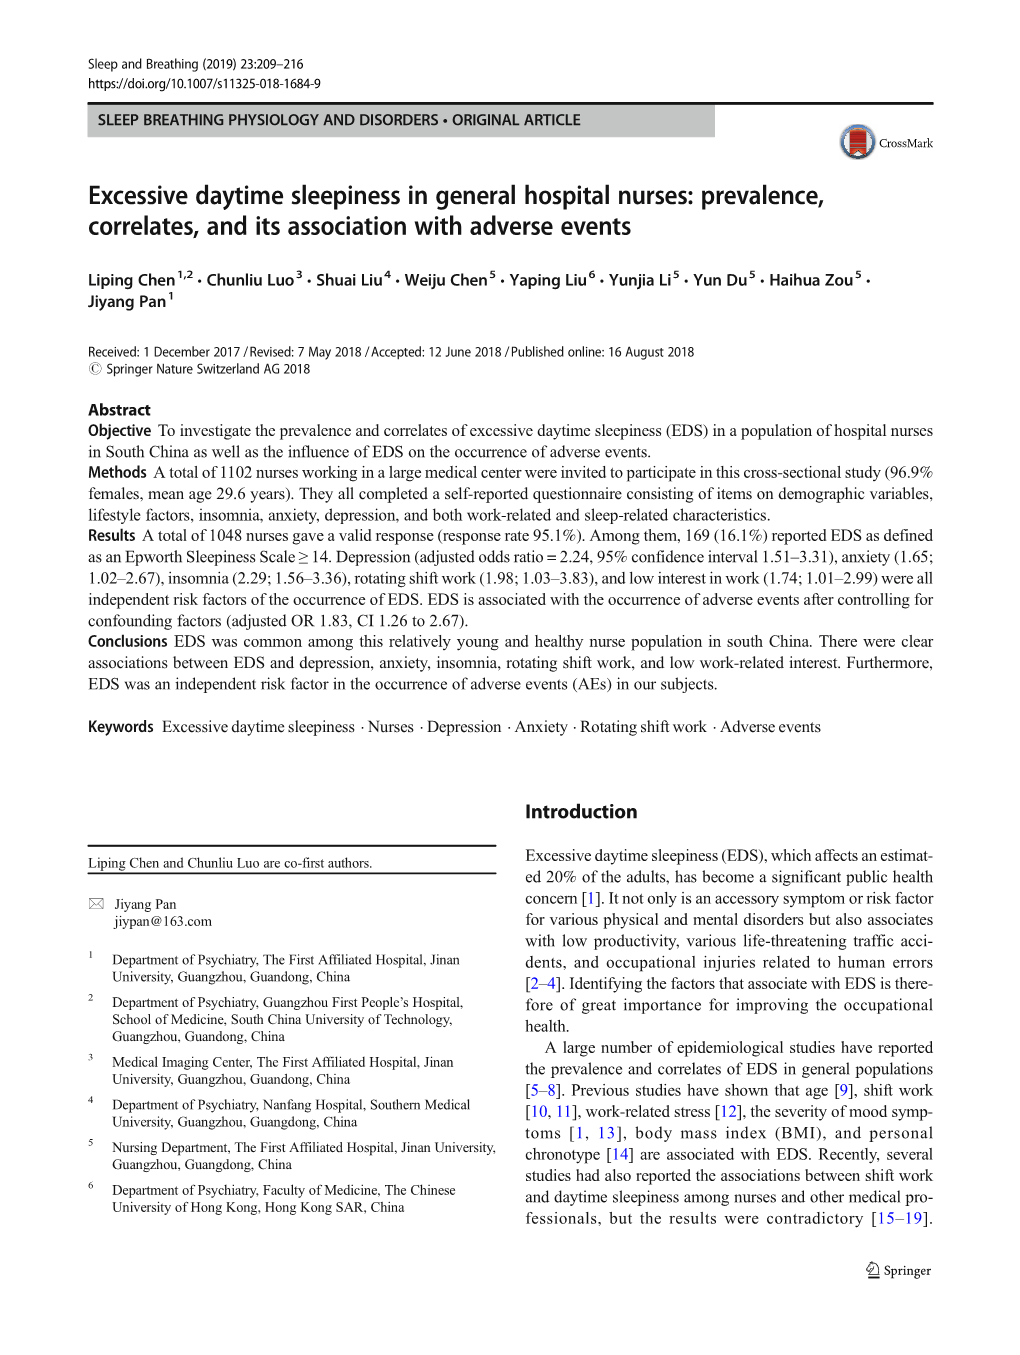 Excessive Daytime Sleepiness in General Hospital Nurses: Prevalence, Correlates, and Its Association with Adverse Events